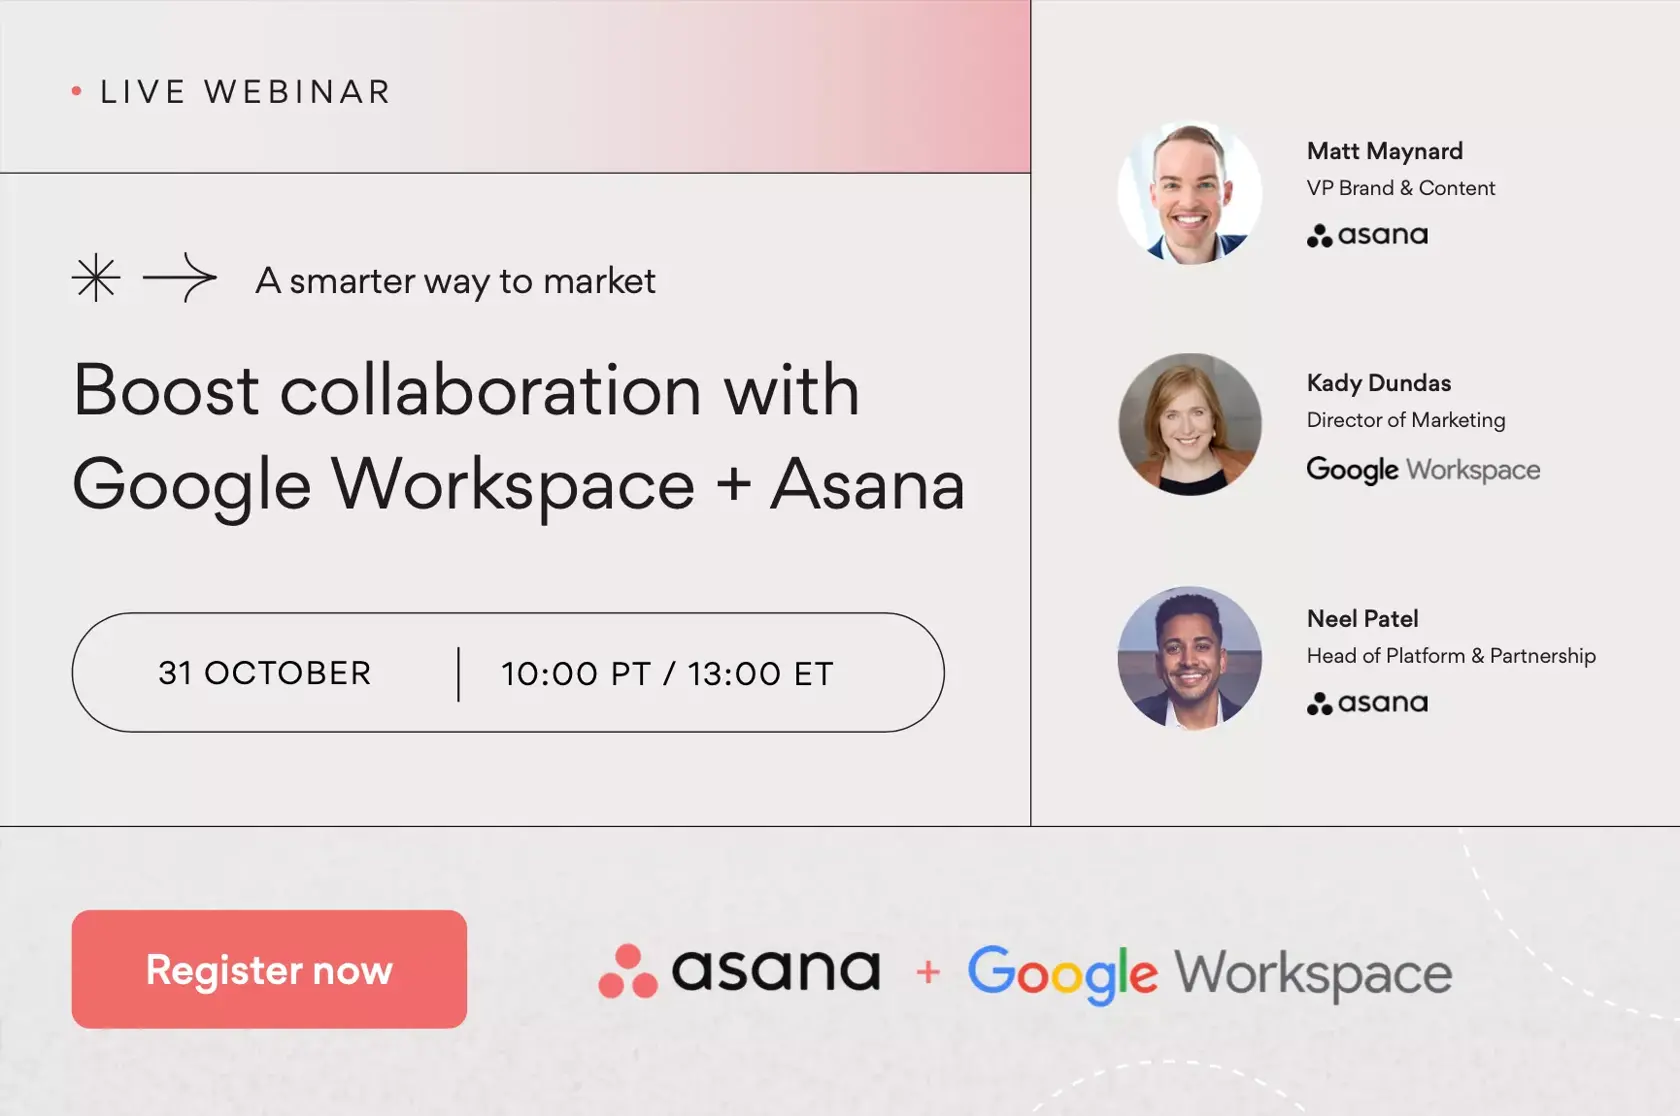 A smarter way to market: Boost revenue with Google Workspace + Asana